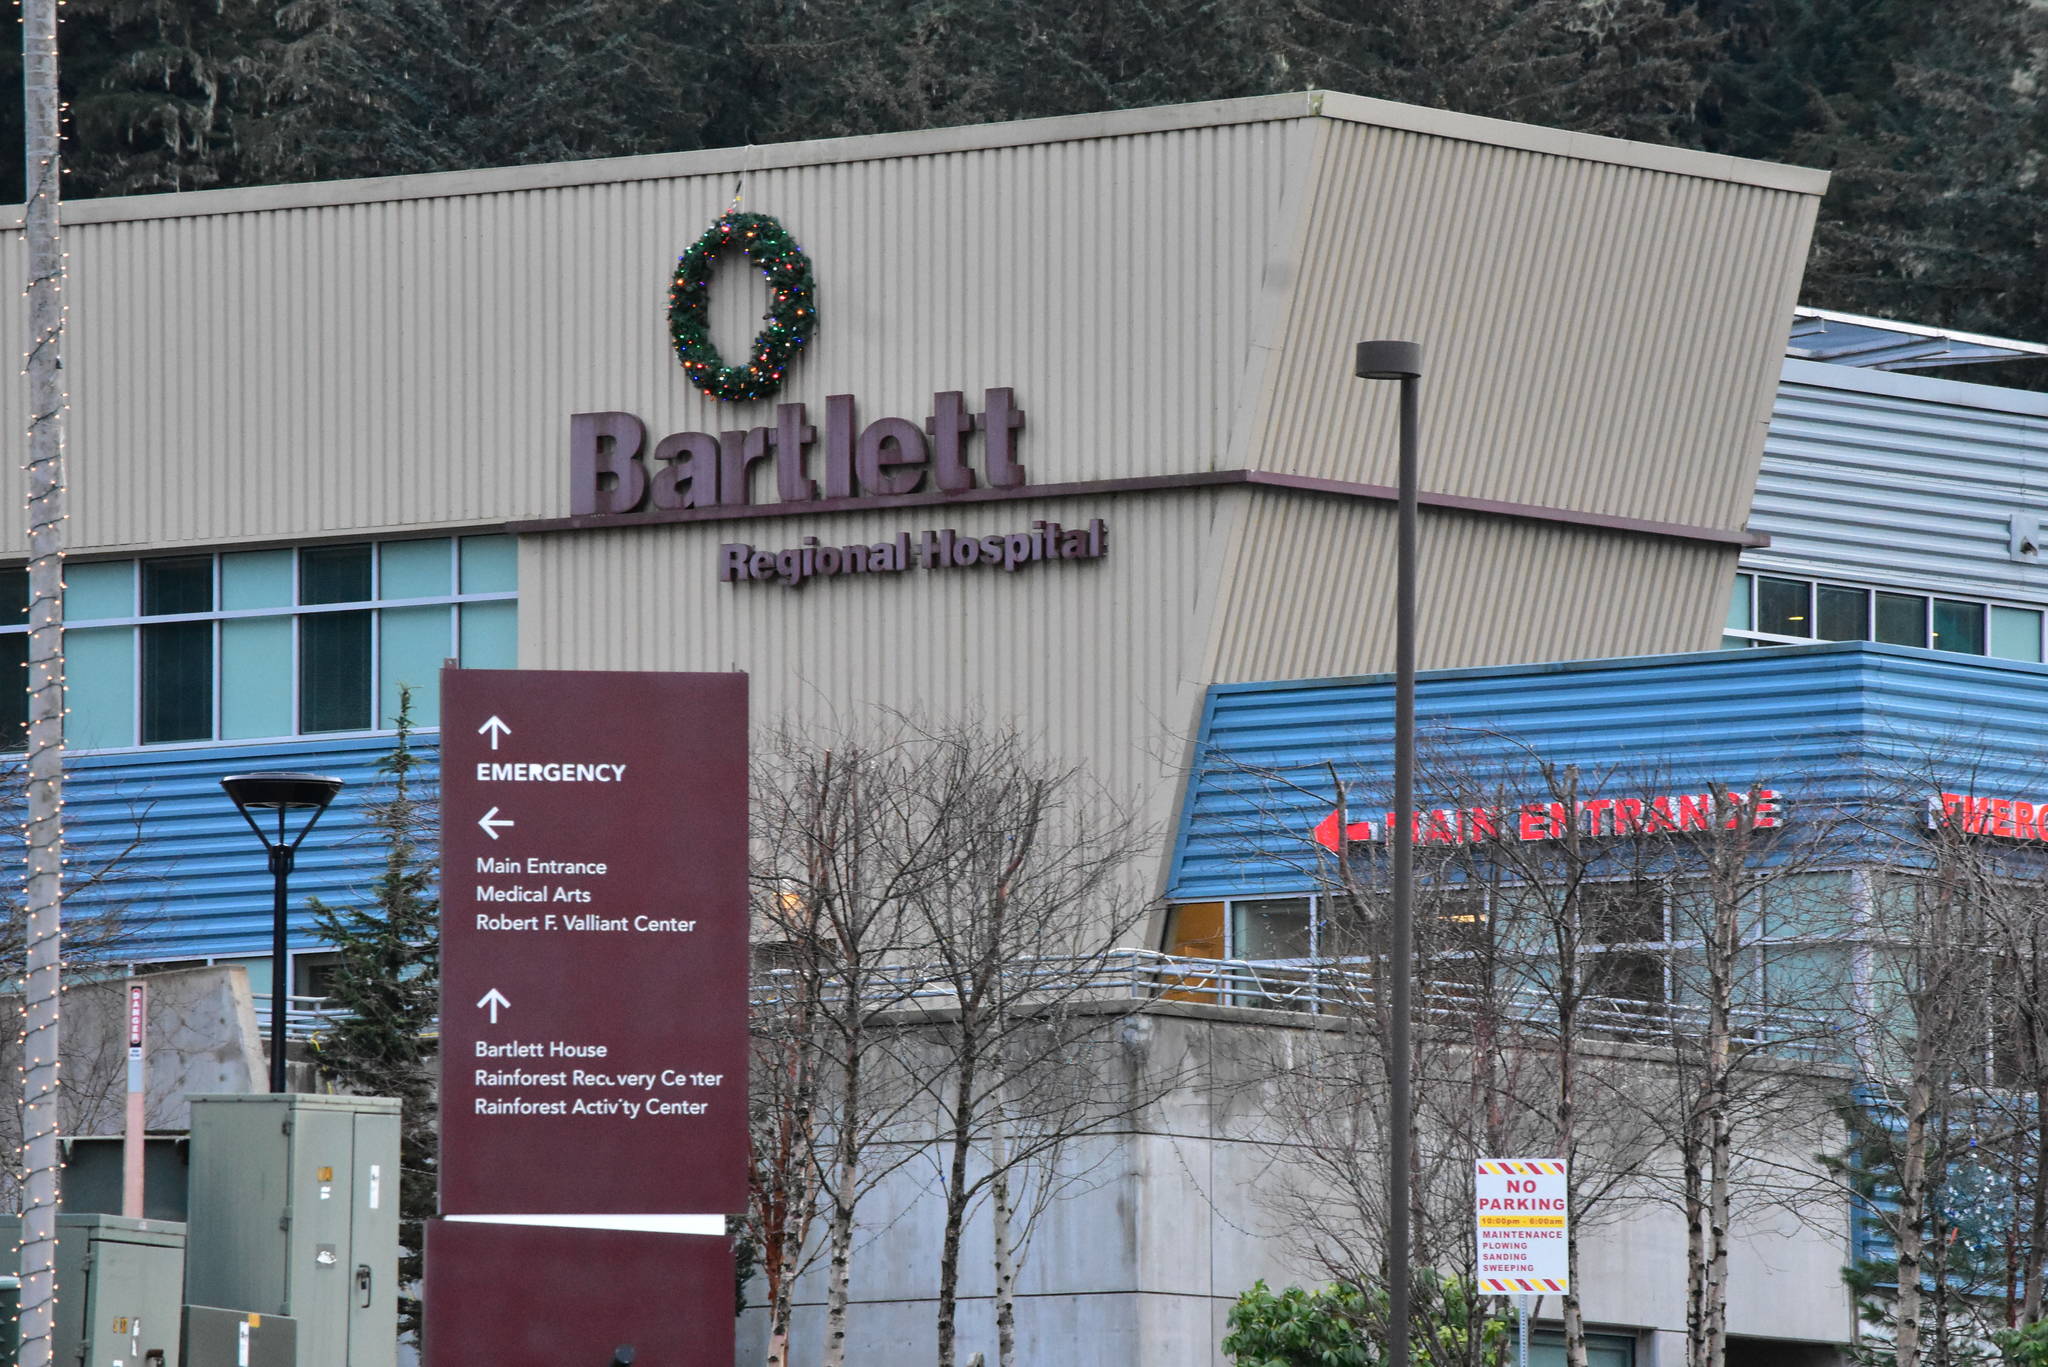 Staff at Bartlett Regional Hospital, seen here on Thursday, Dec. 10, 2020, will be among some of the first to receive a vaccine for COVID-19 once federal authorities give the go-ahead. (Peter Segall / Juneau Empire File)